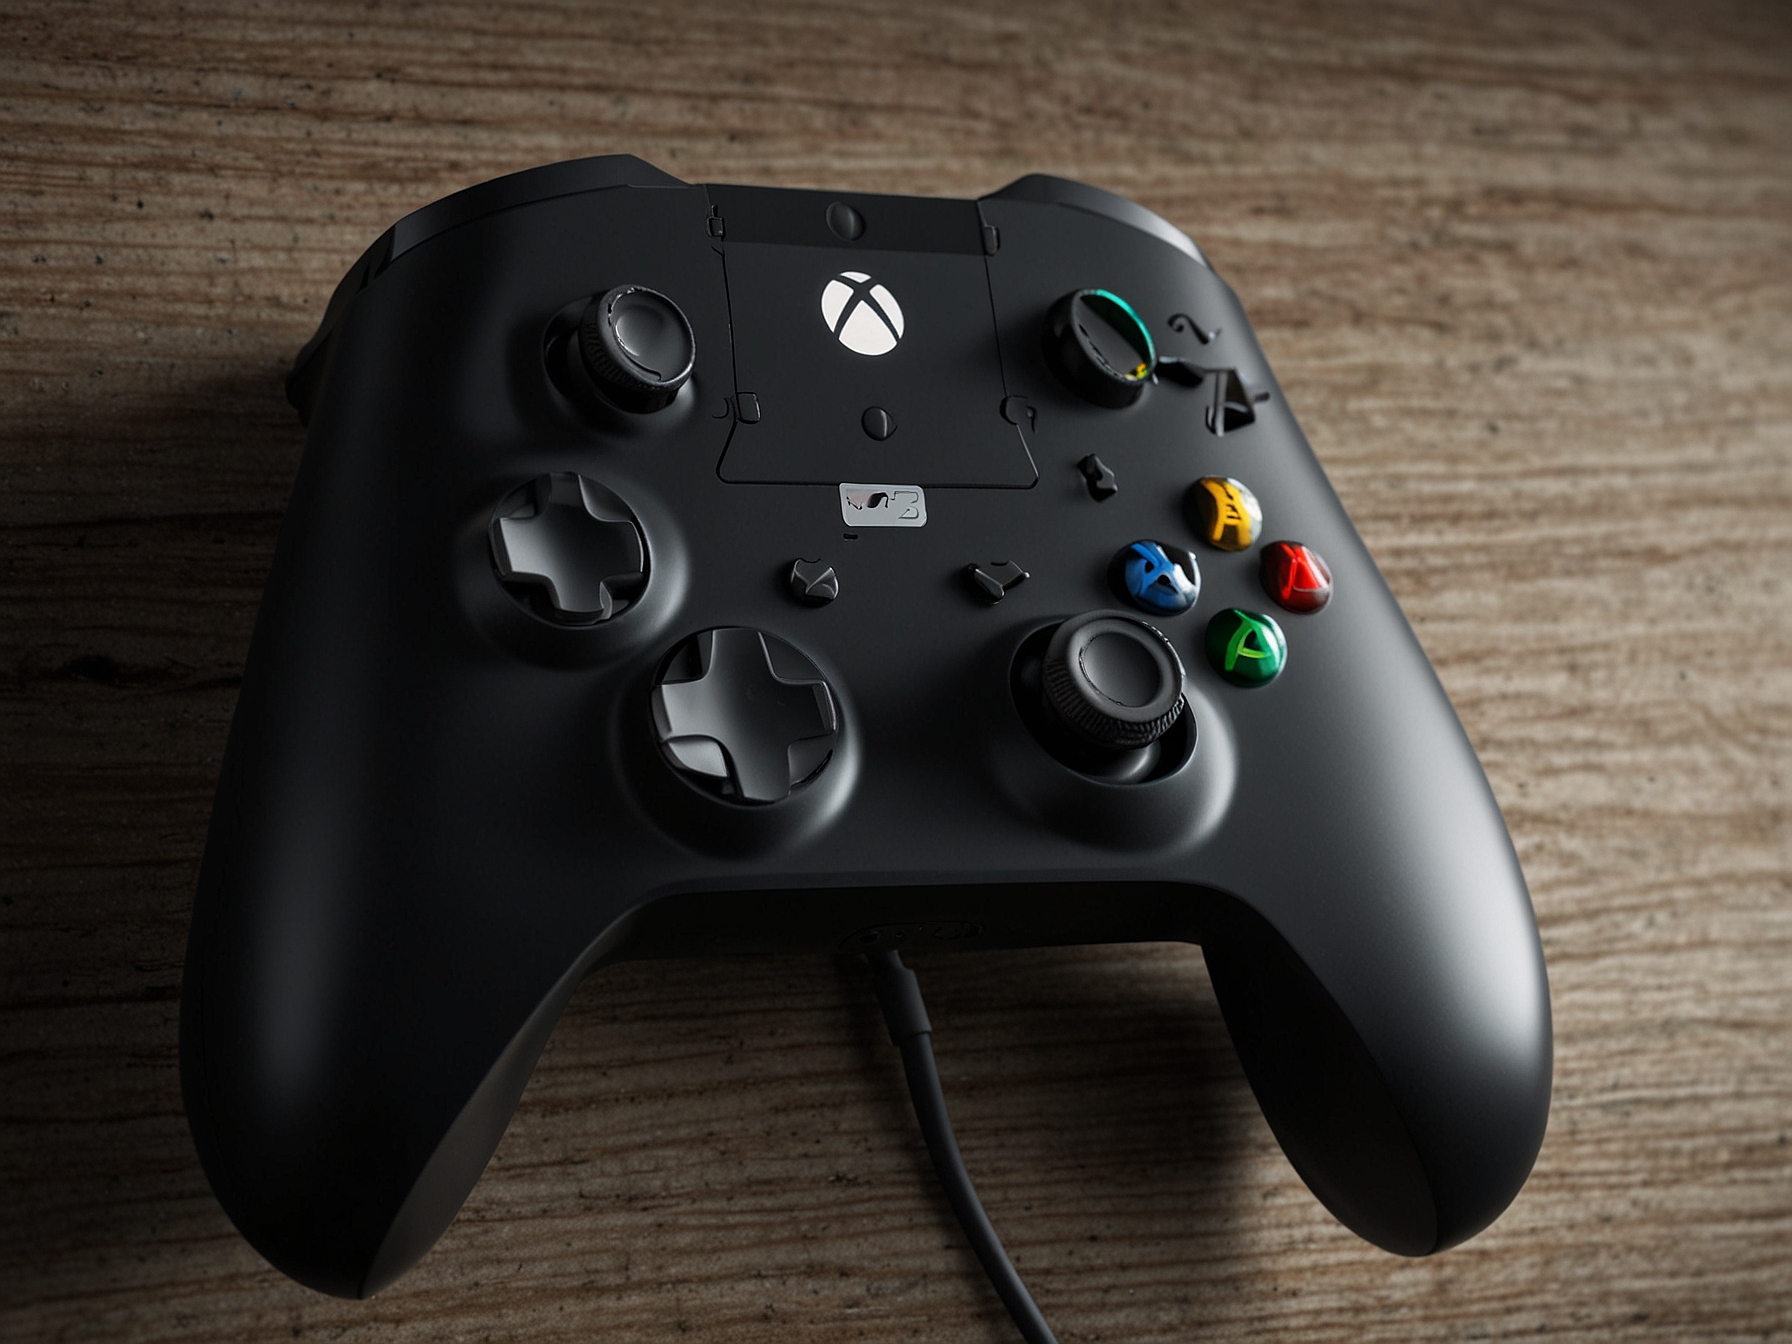 An illustration of a smartphone attached to an Xbox controller, enabling cloud gaming on the go with Xbox Cloud Gaming. The setup highlights the convenience and stable performance of playing 'Forza Horizon 4' in various settings.